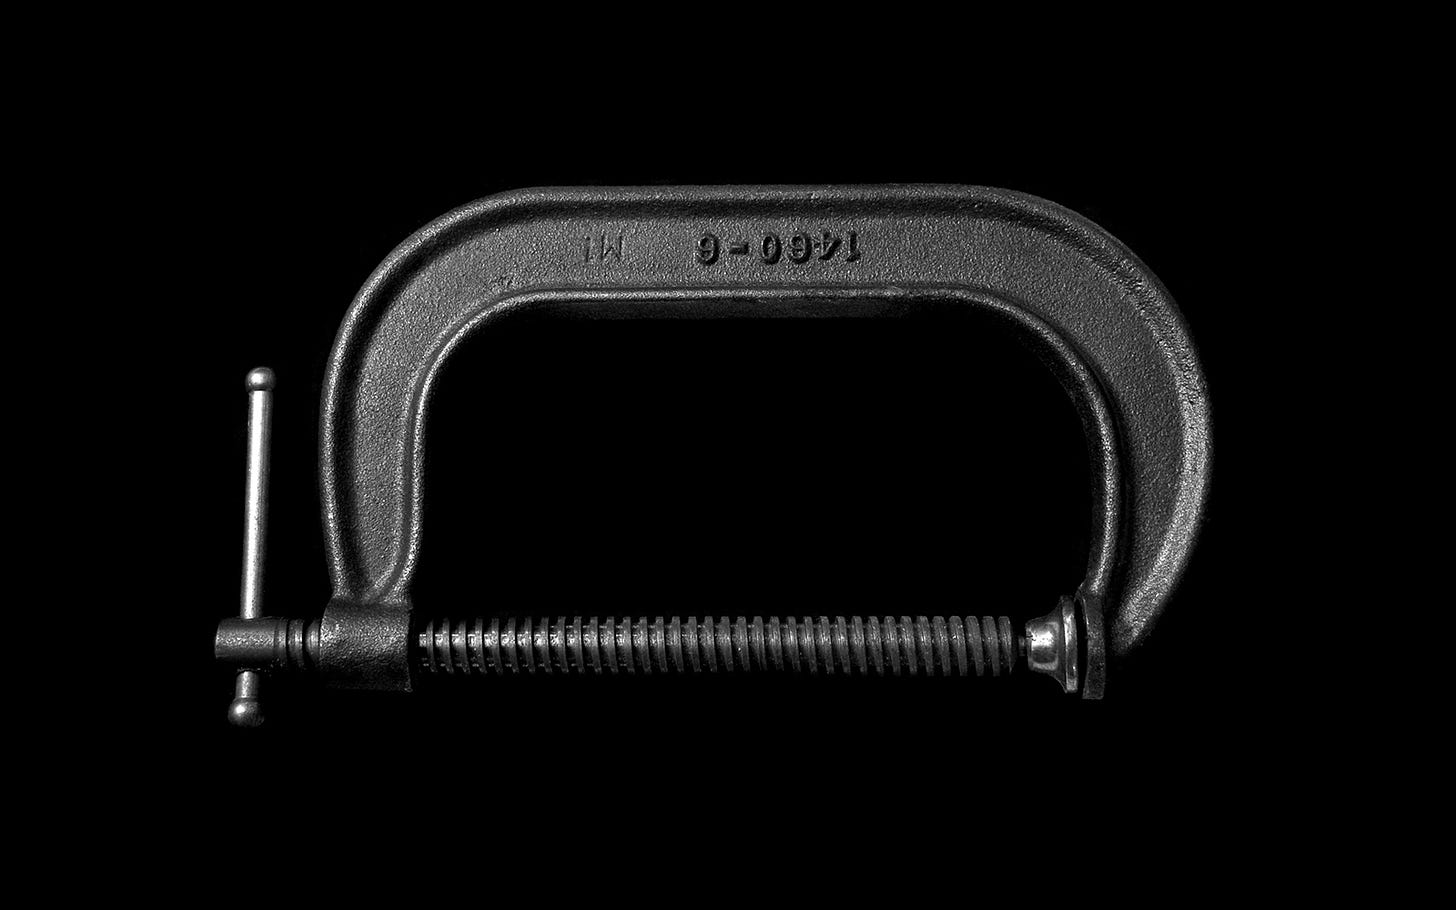 Serious portrait of a metal C clamp on a black background